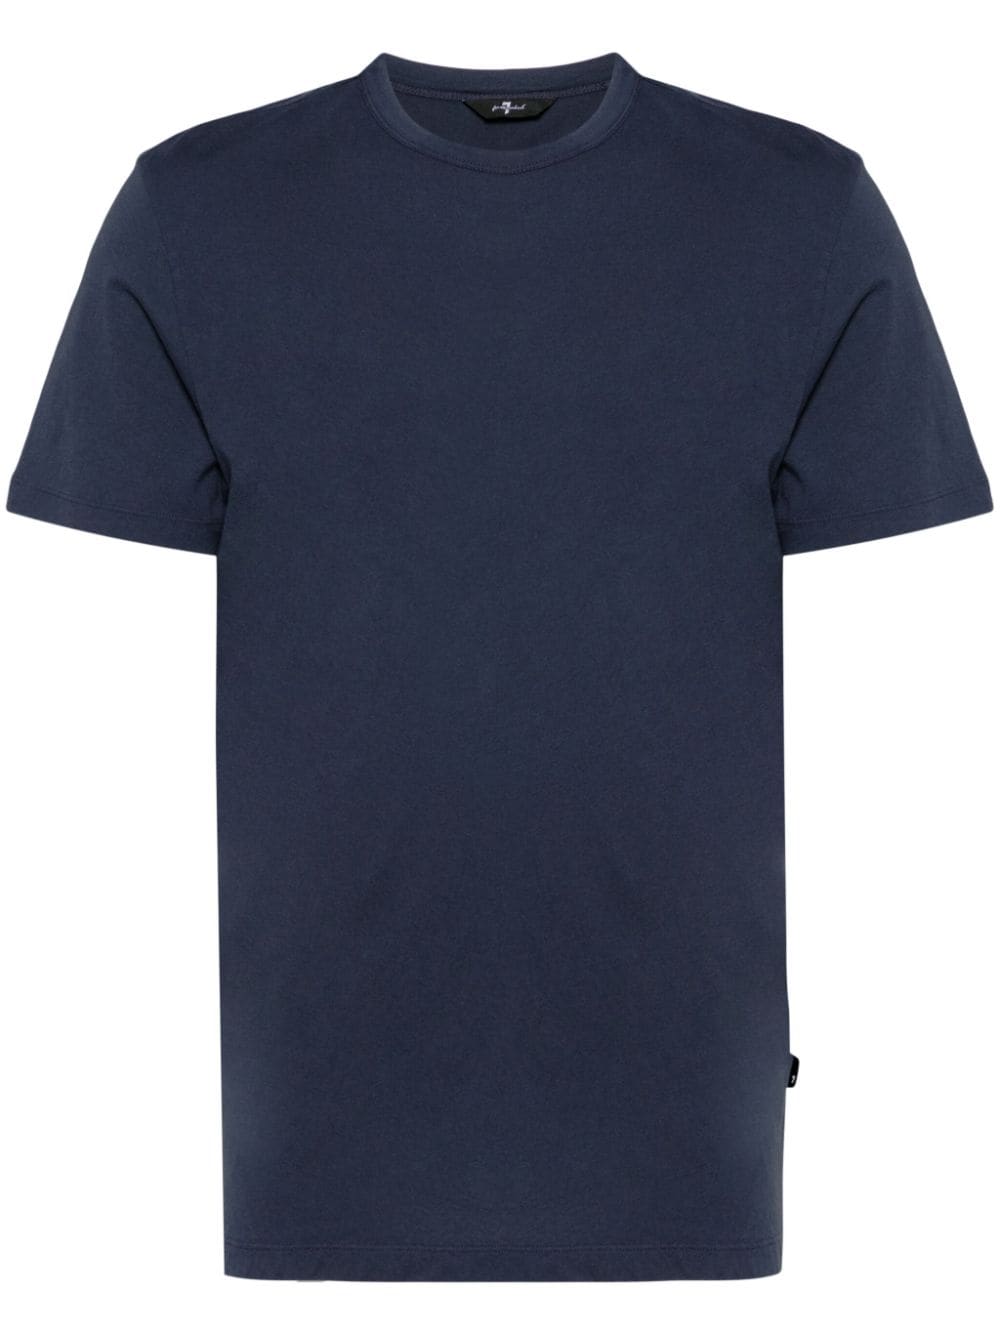 7 For All Mankind Featherweight cotton T-shirt - Blue von 7 For All Mankind